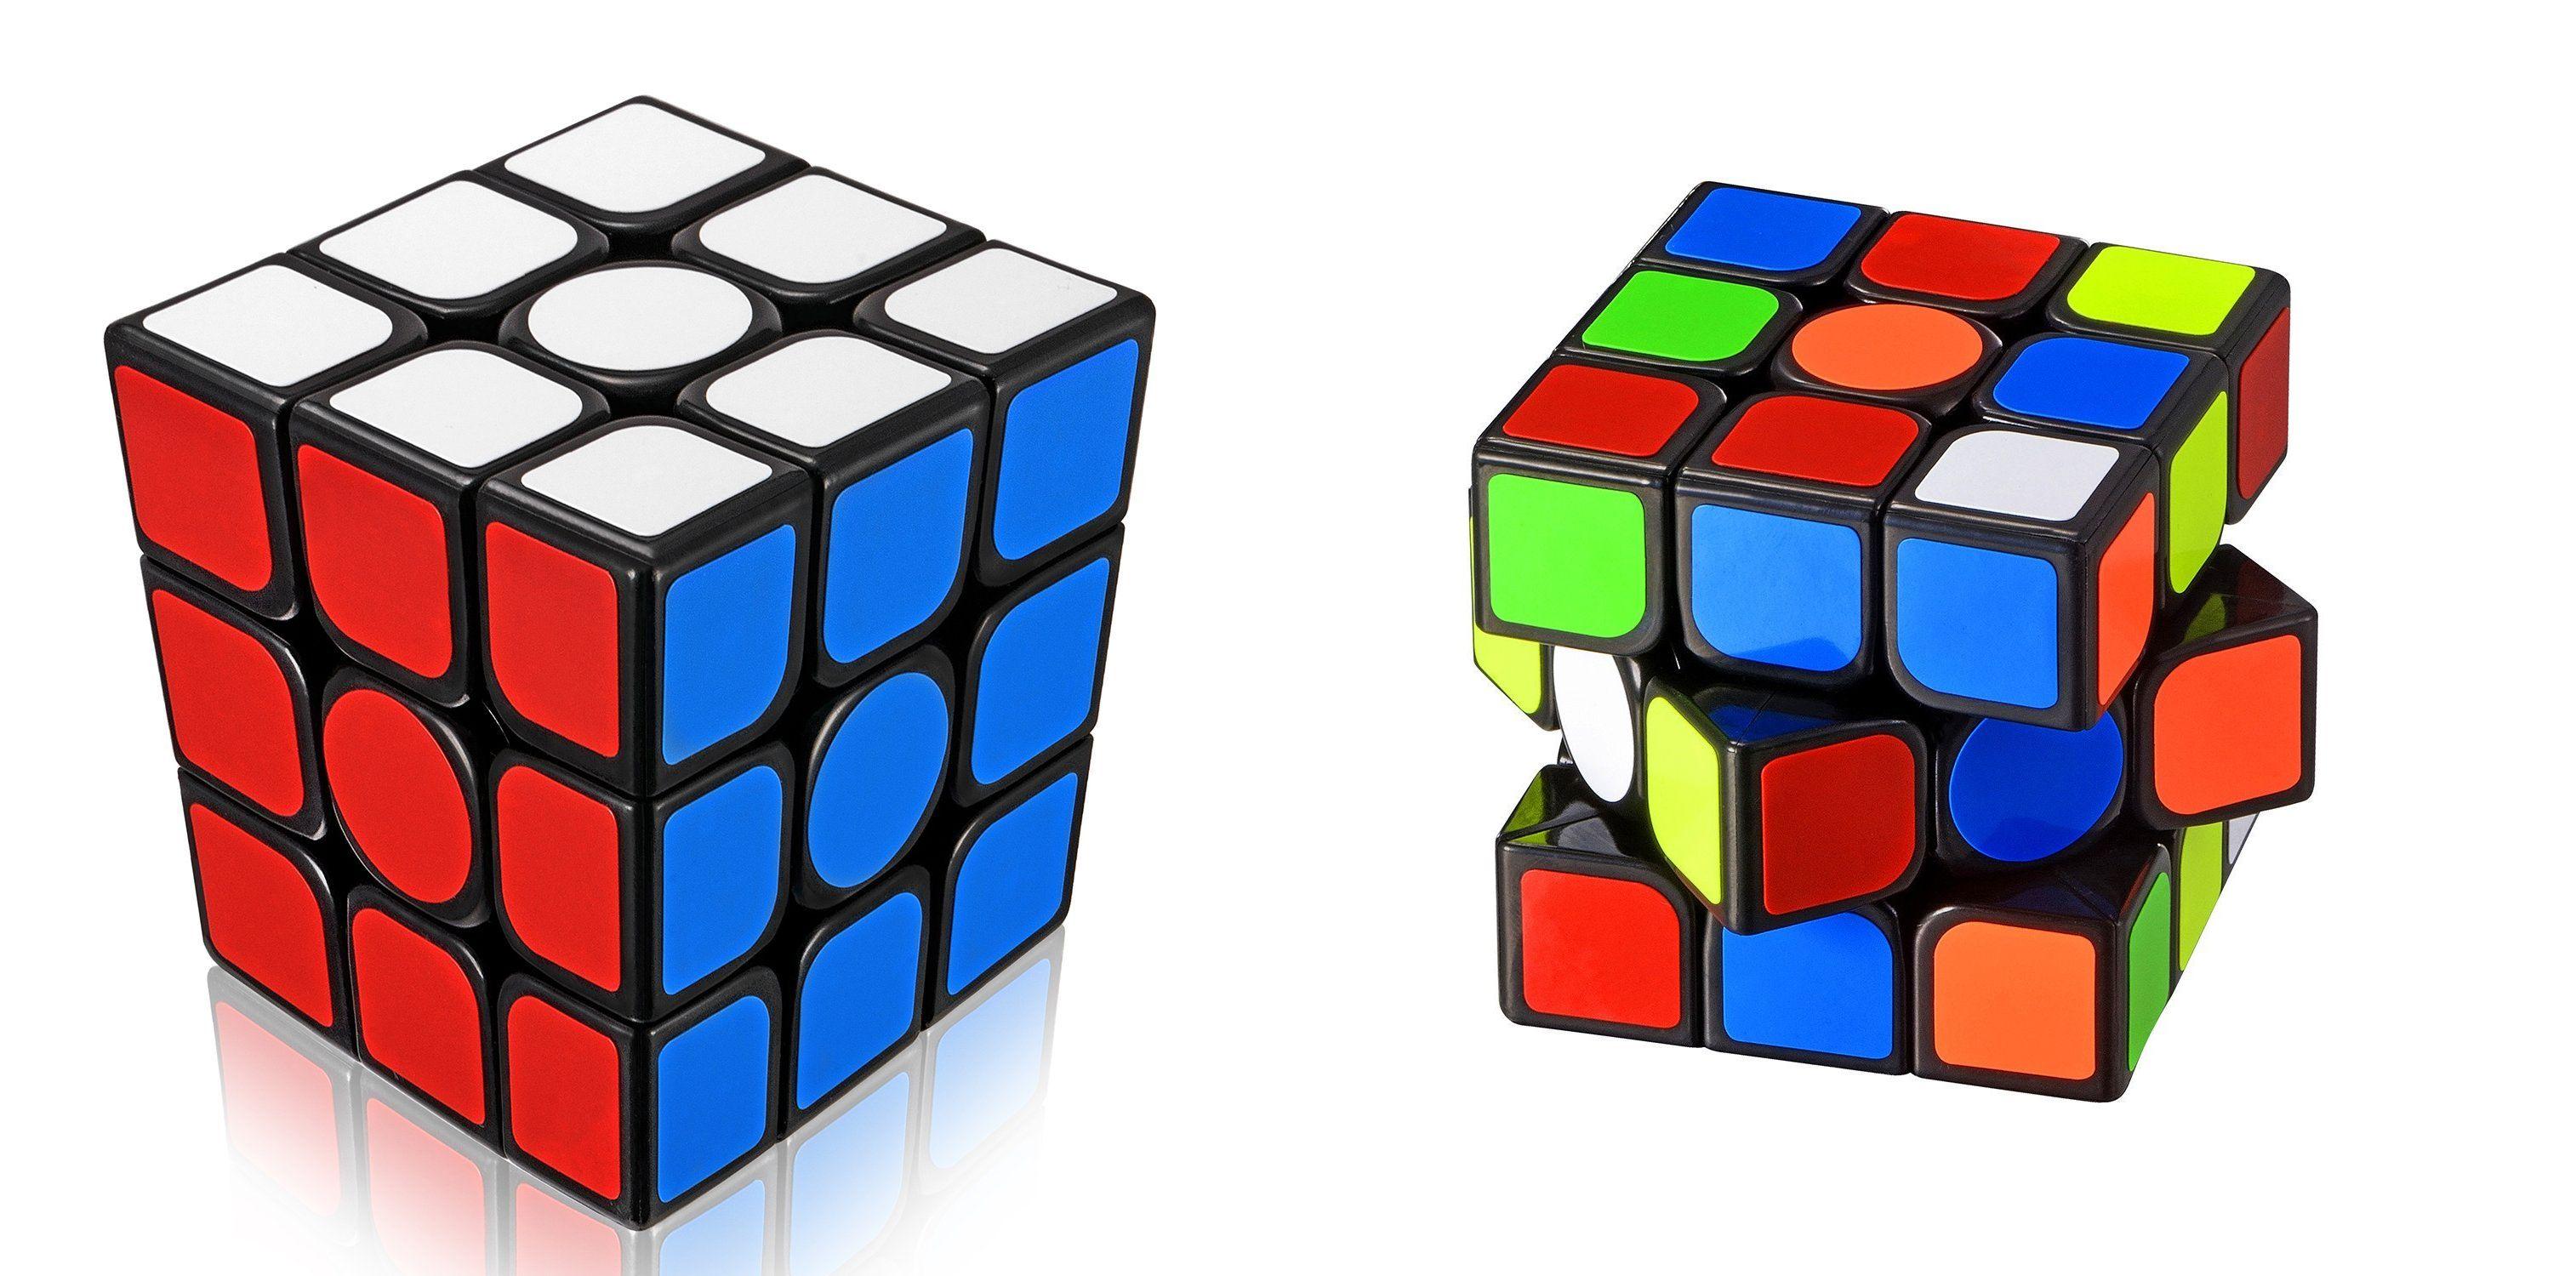 Rubik's Cube wallpapers, Game, HQ Rubik's Cube pictures